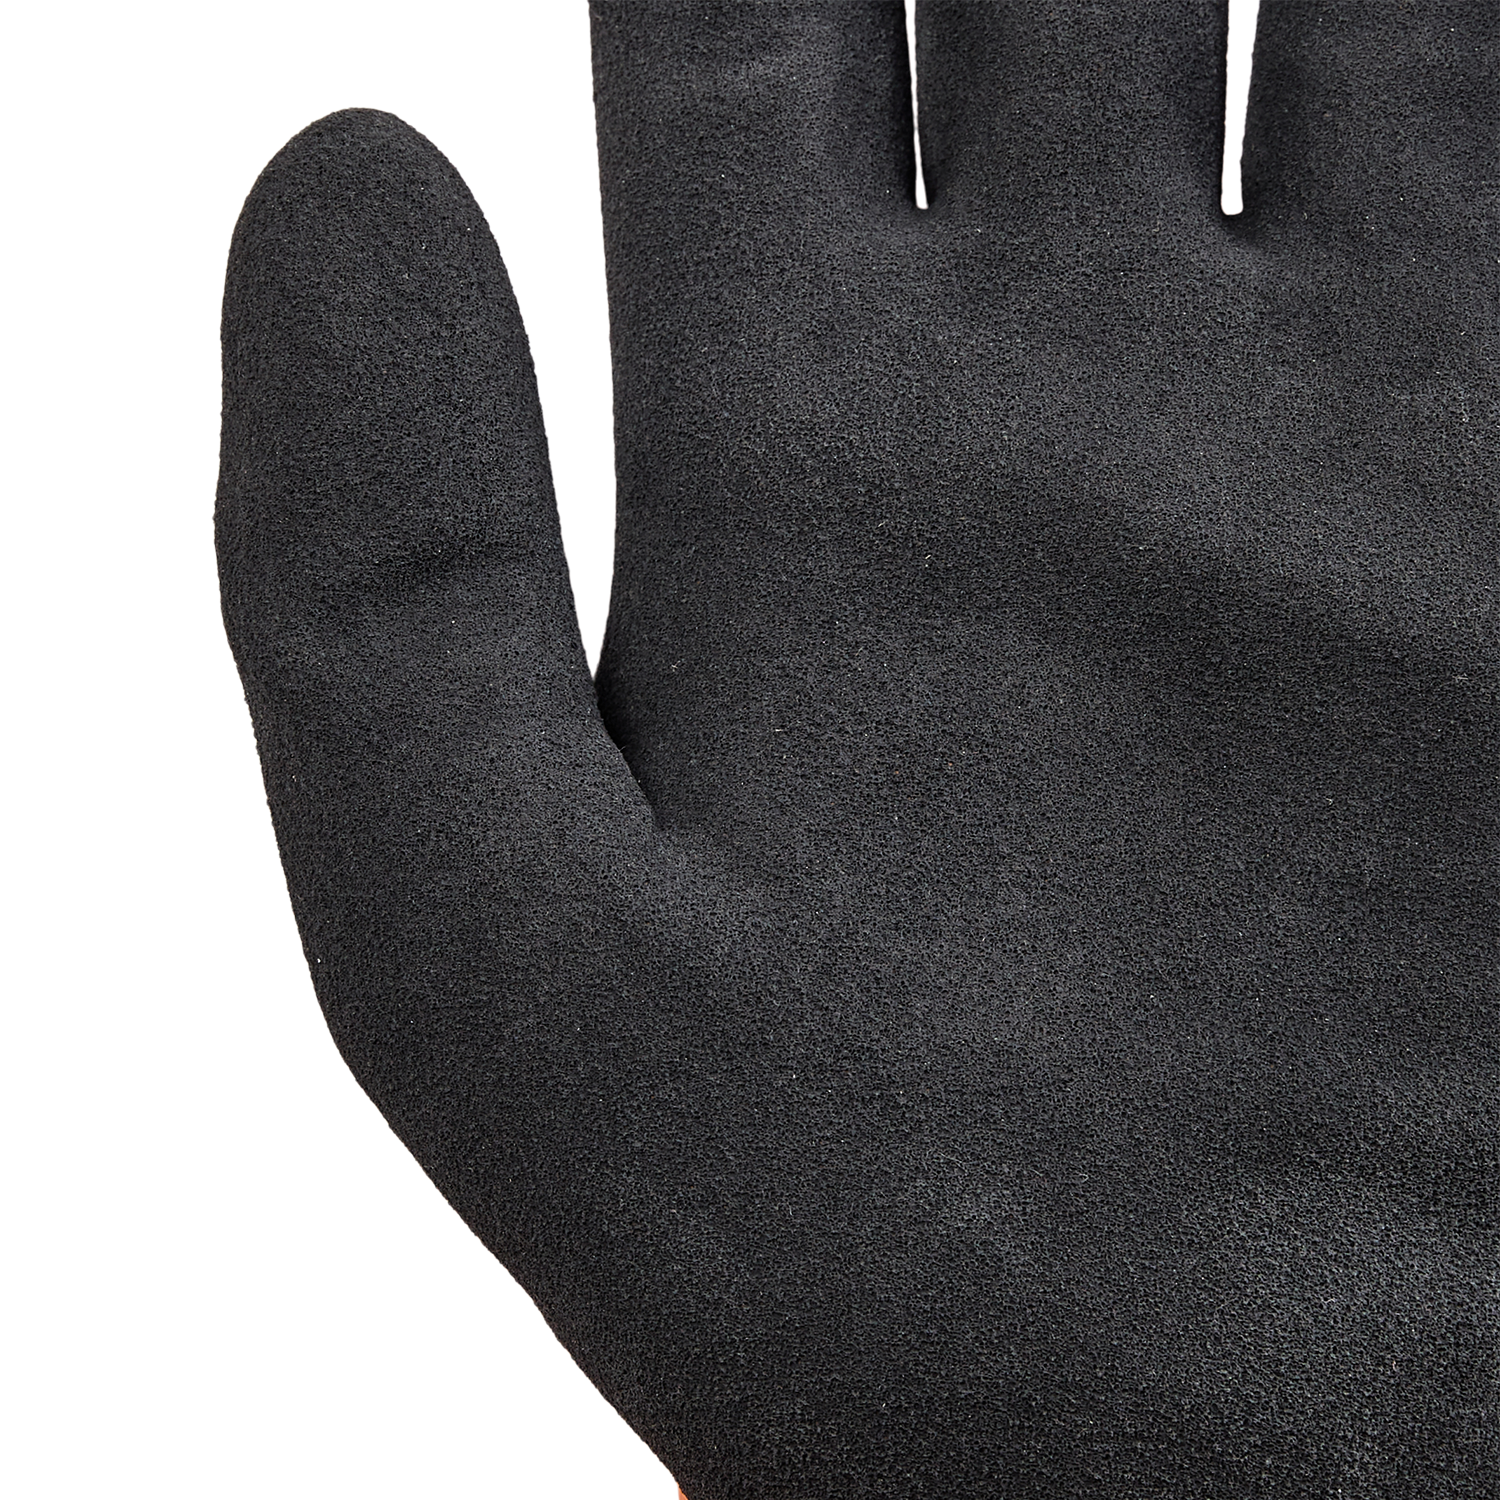 NORSE Arctic waterproof winter assembly gloves size 10